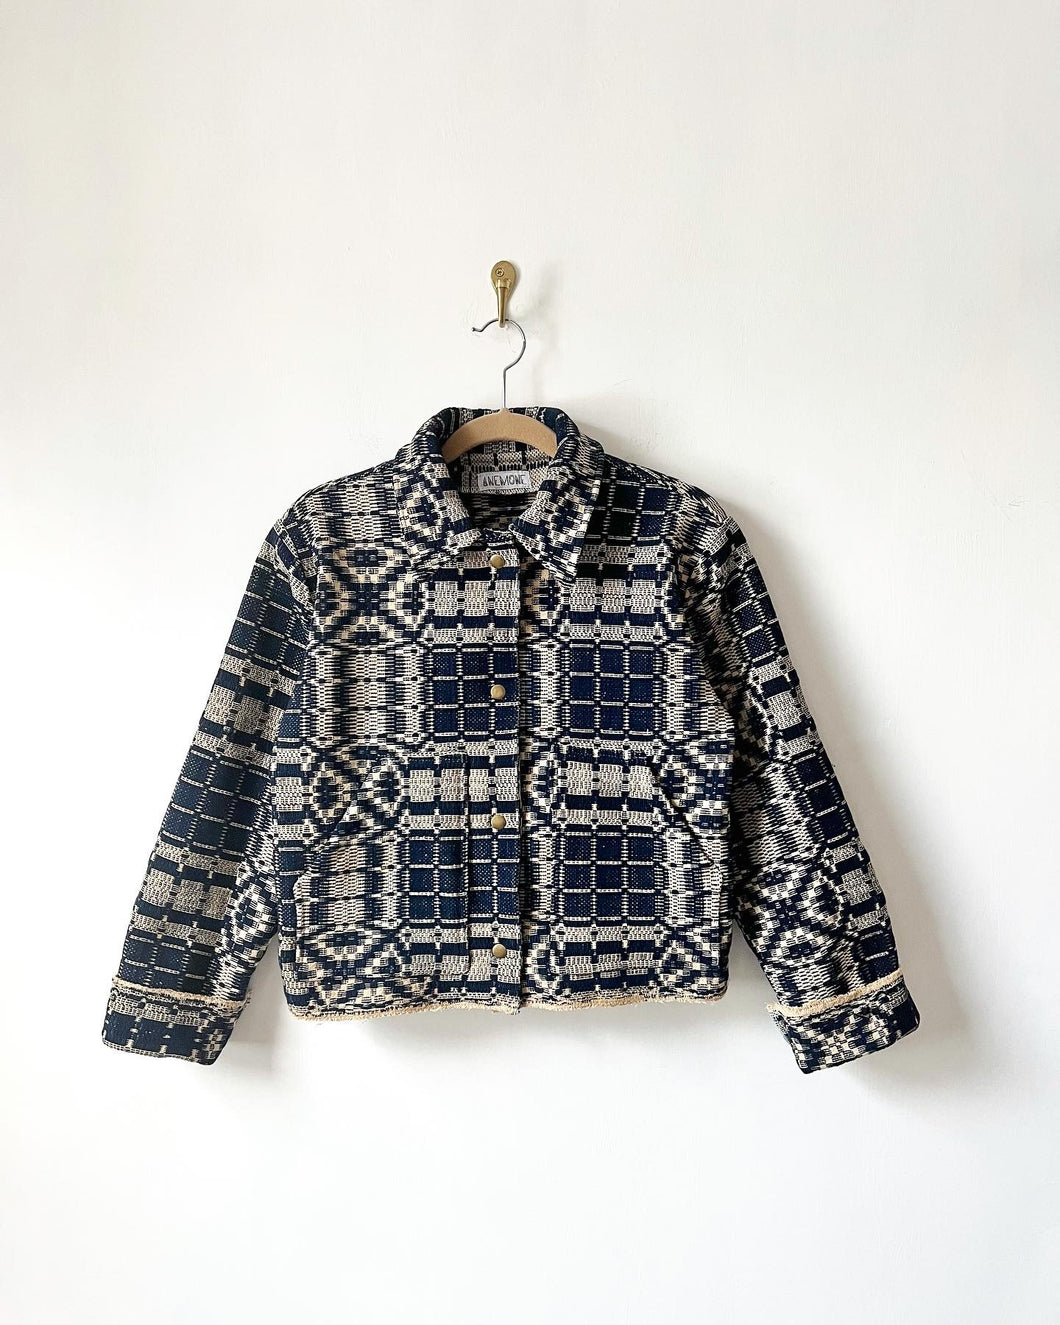 One-of-a-Kind: Overshot Coverlet Cropped Coat (navy/cream)